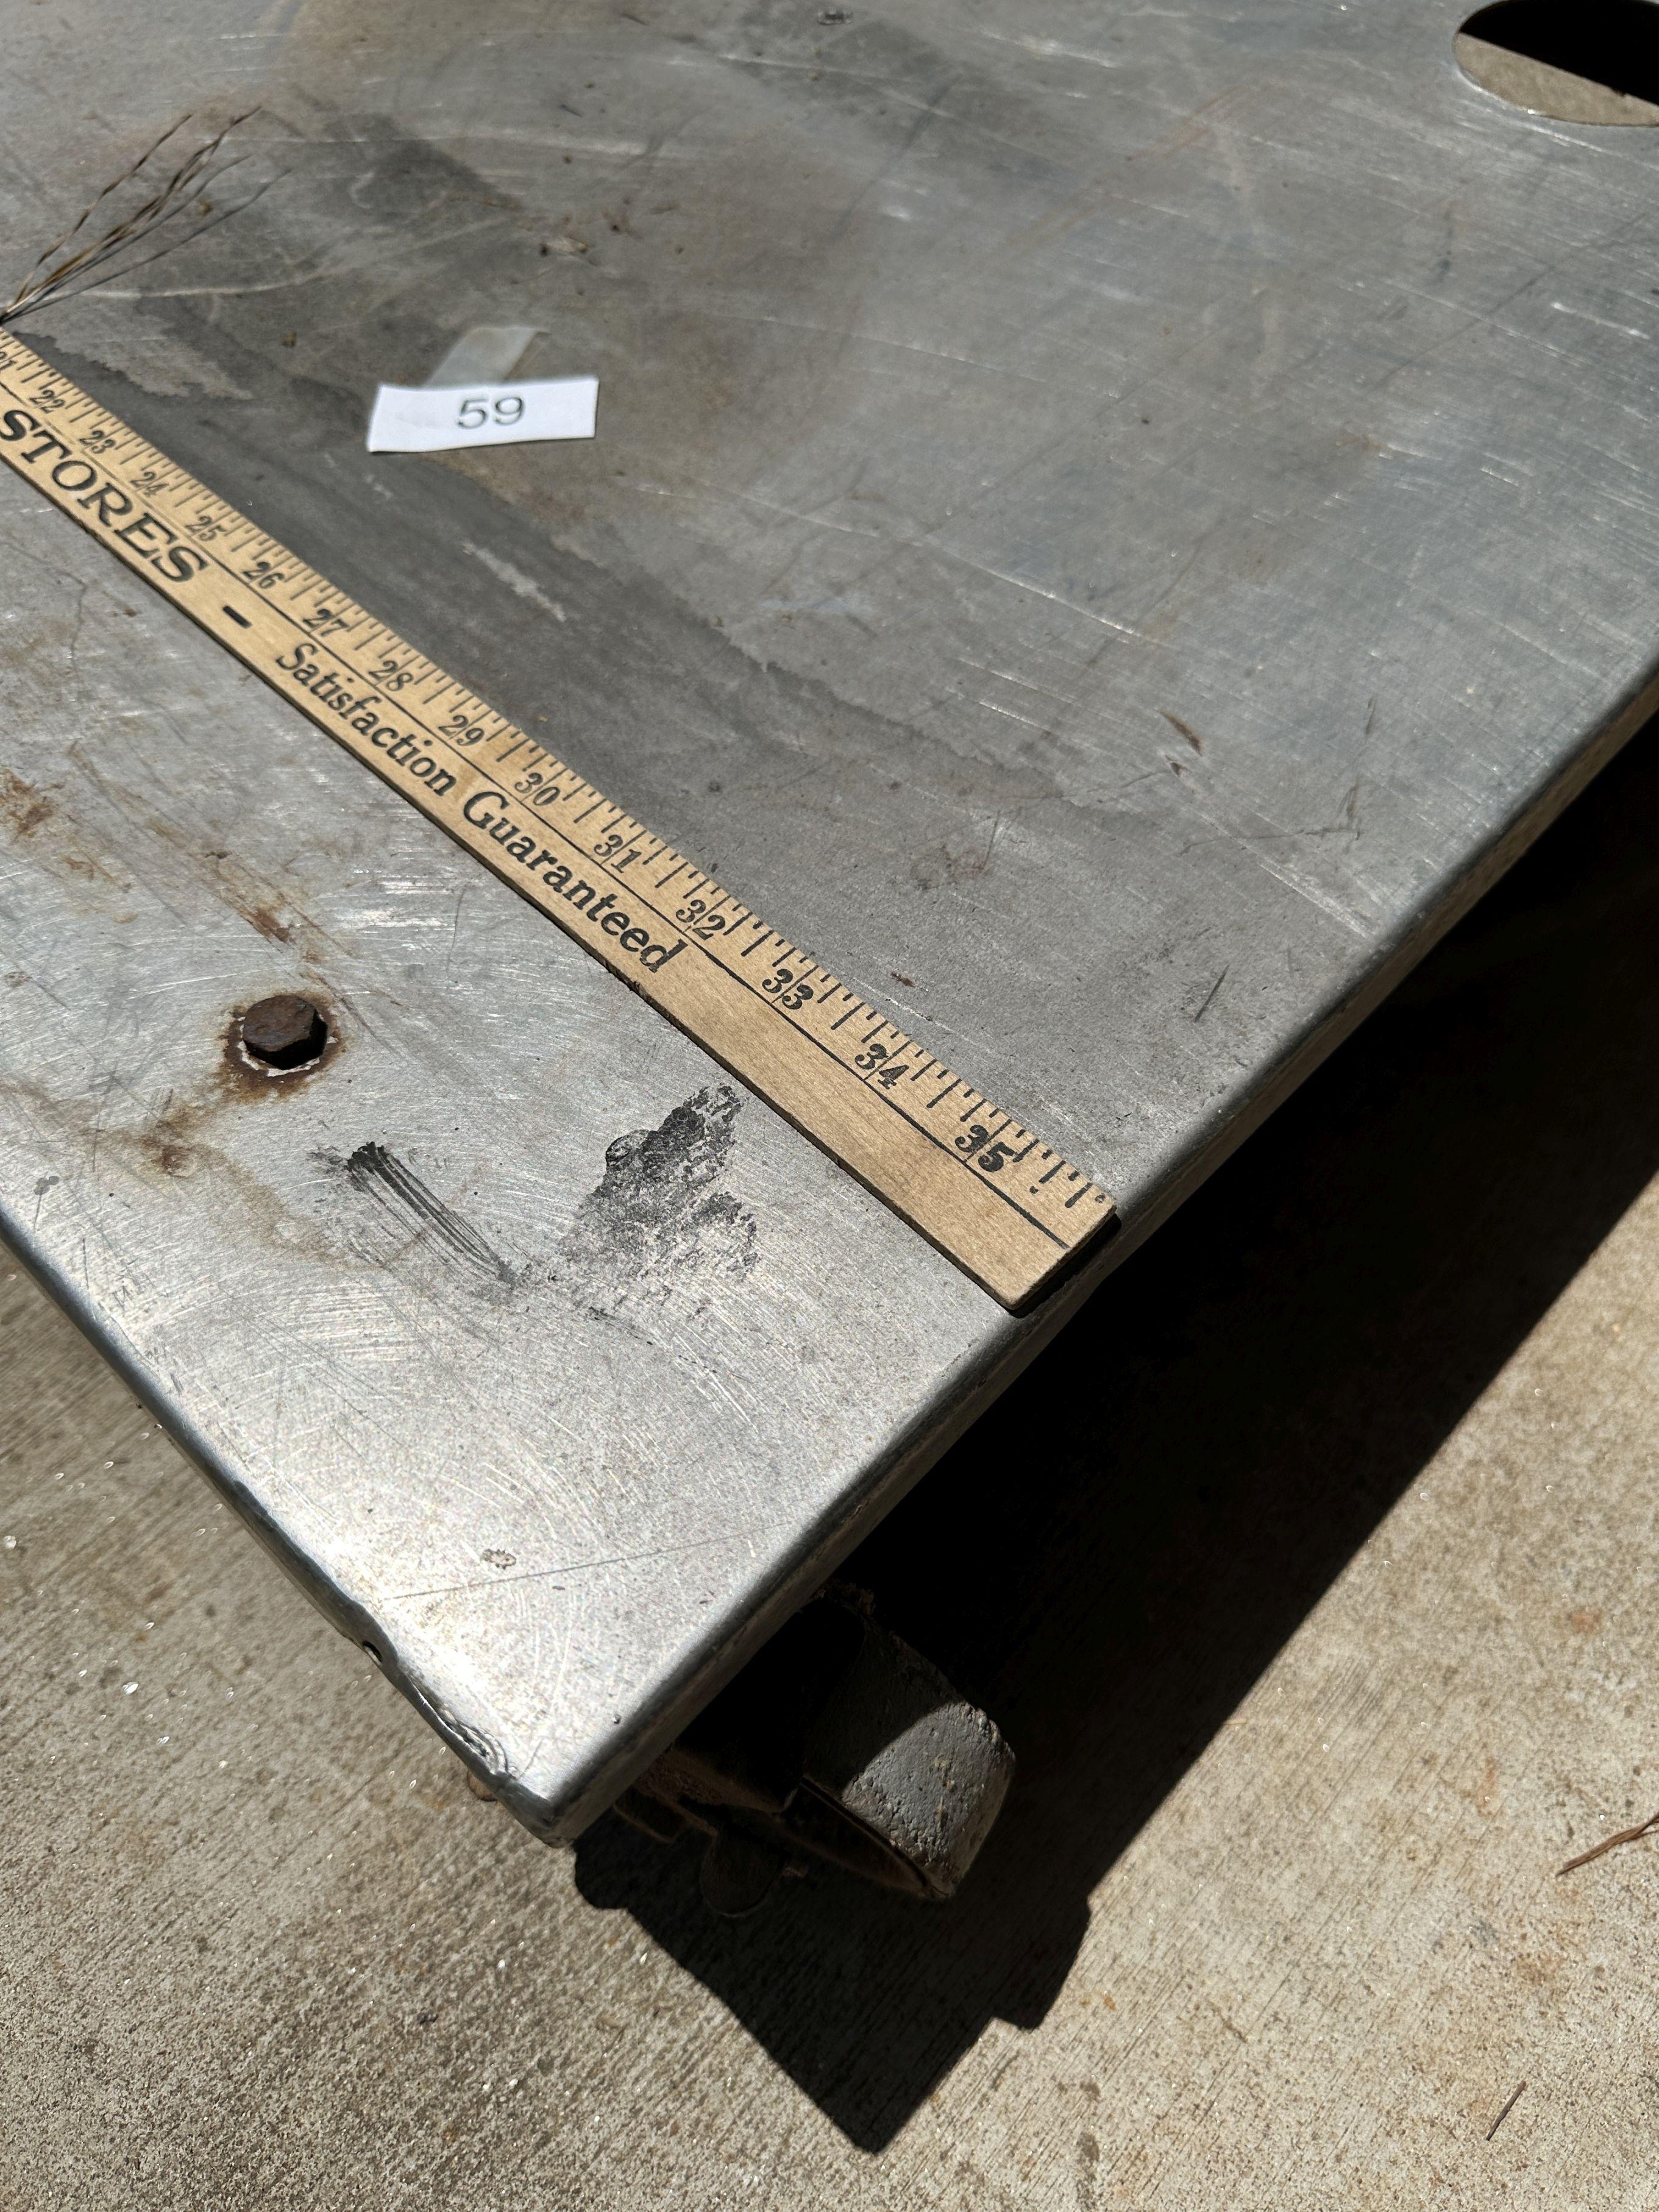 Large Heavy Duty Stainless Steel Dolly (Local Pick Up Only)